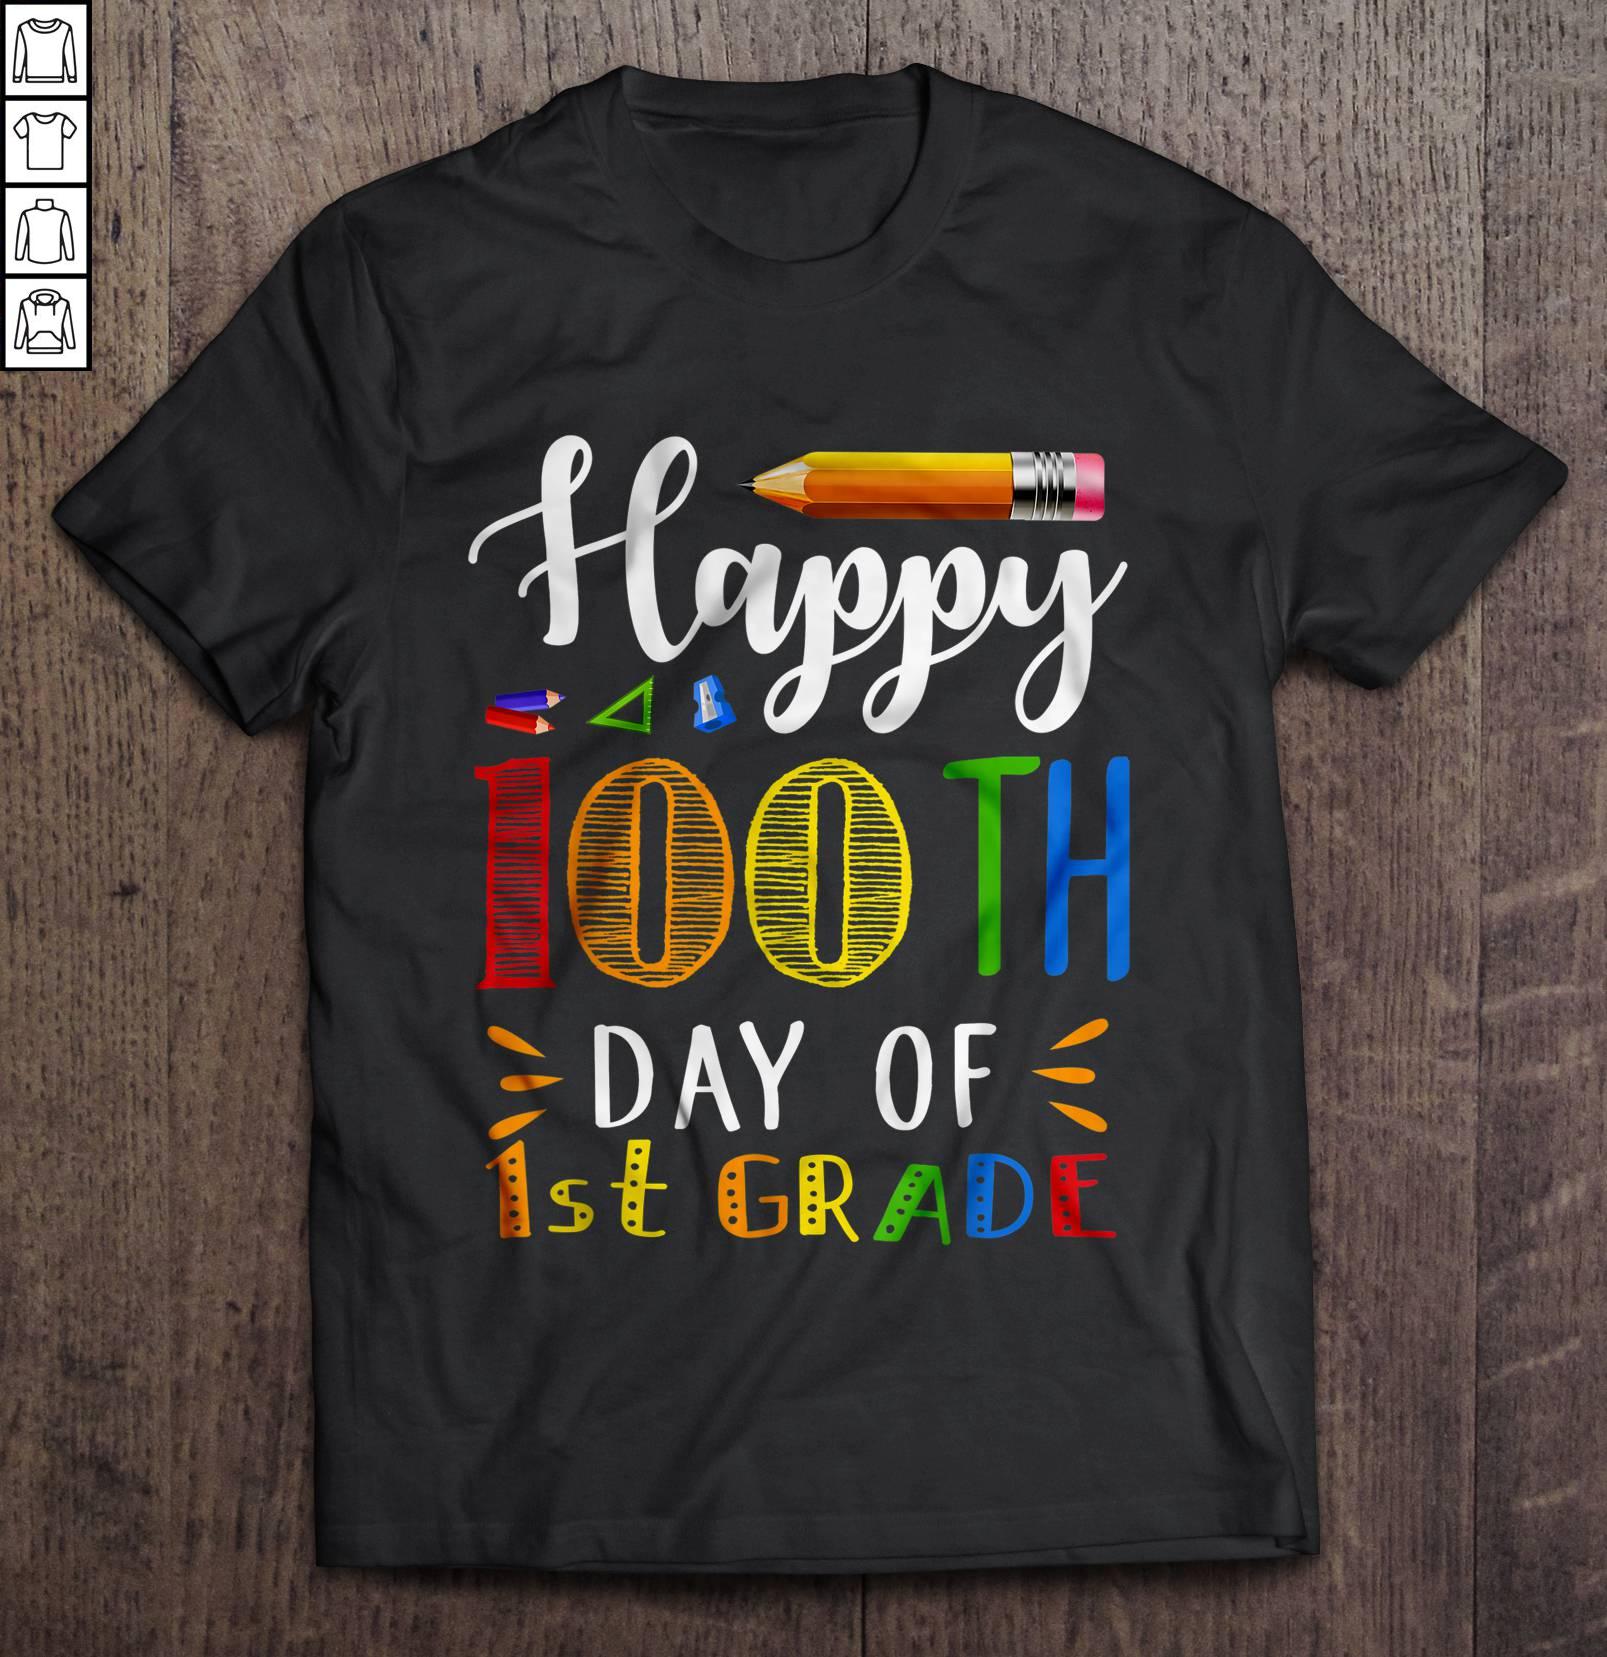 Happy 100th Day Of 1st Grade Tee Shirt